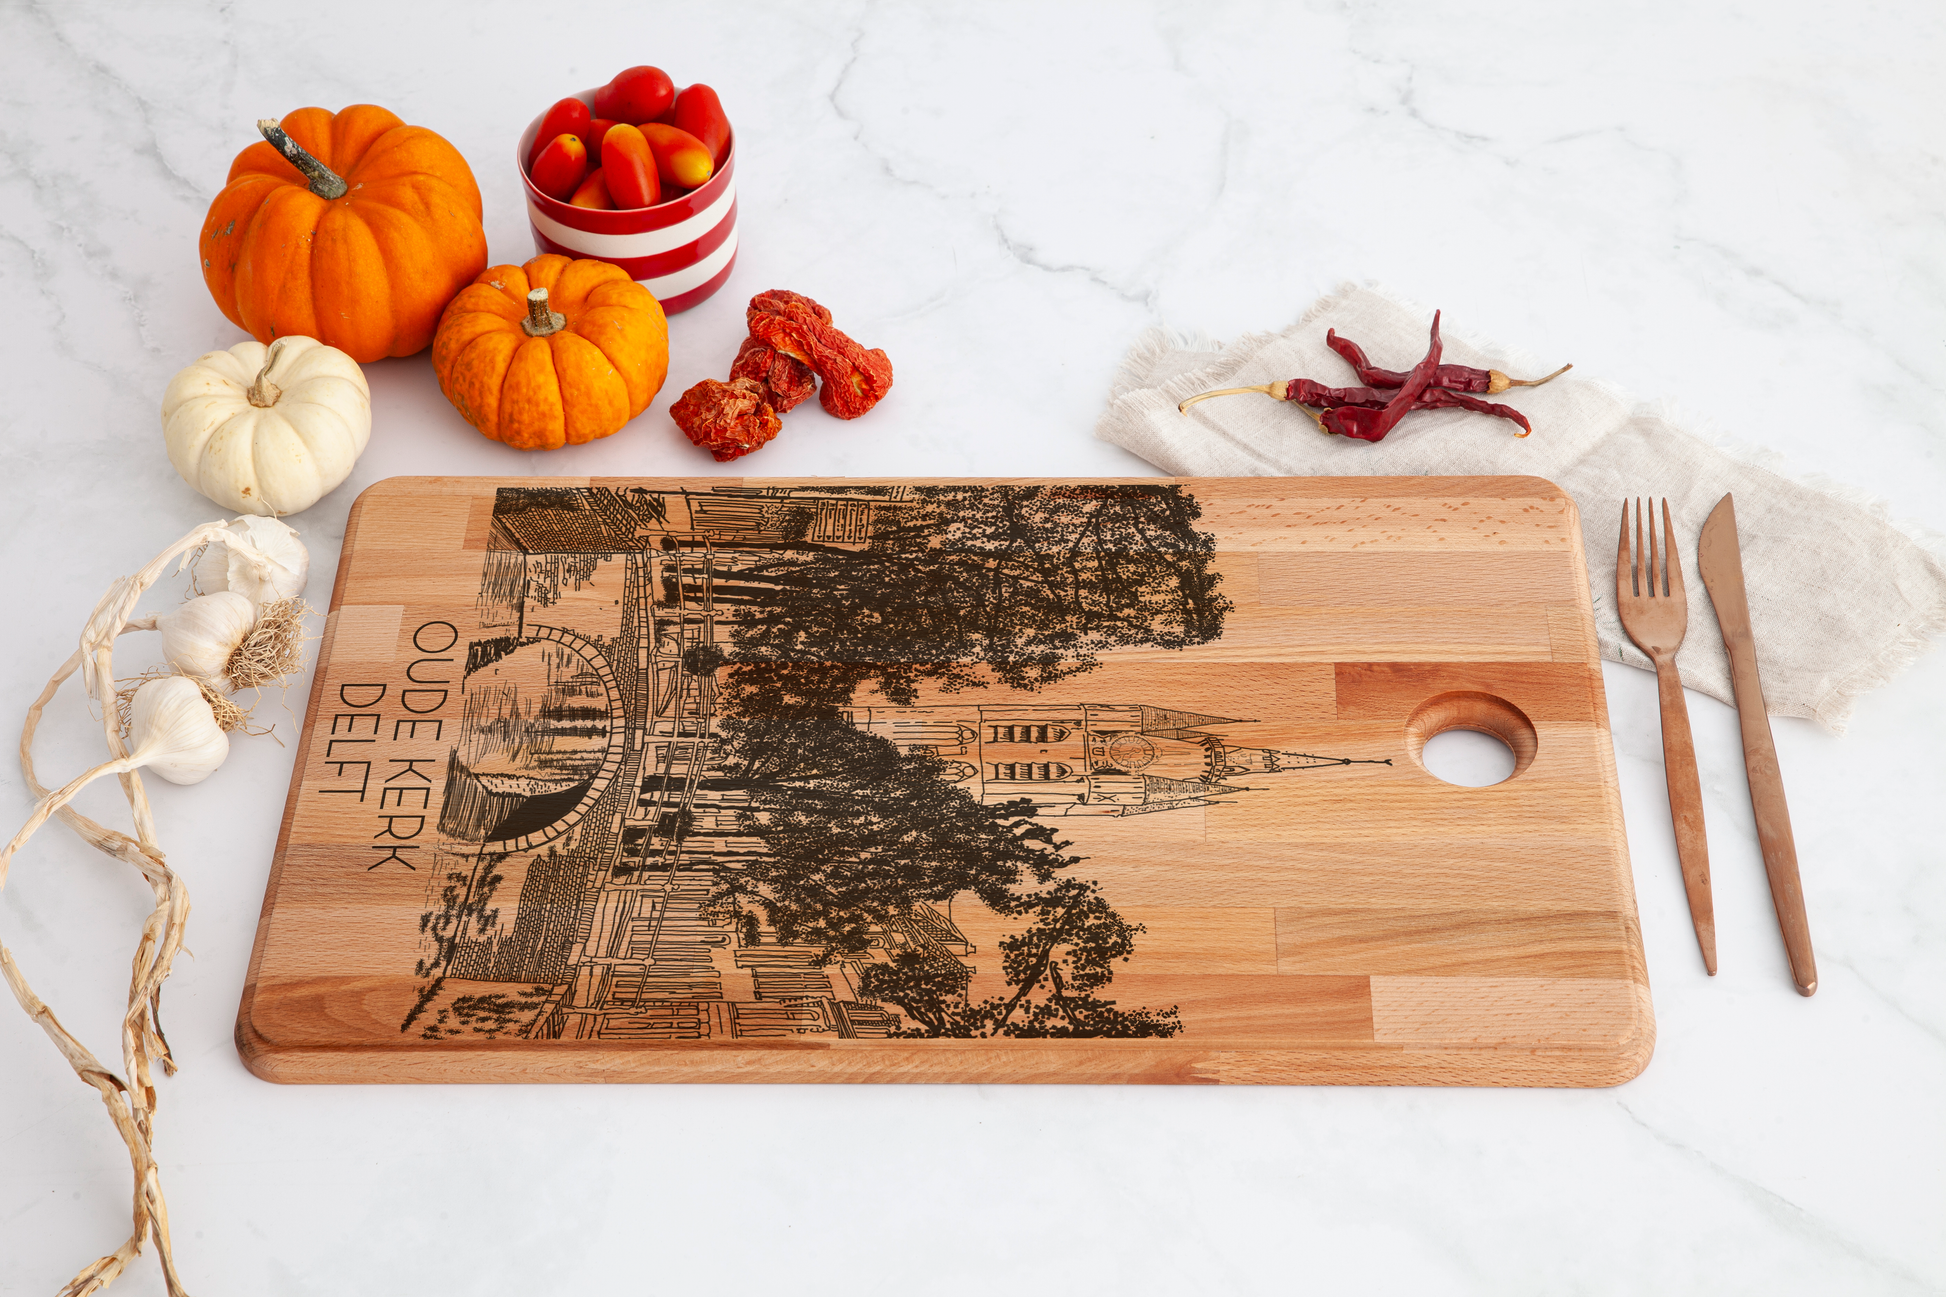 Delft, Oude Kerk, cutting board, with knife